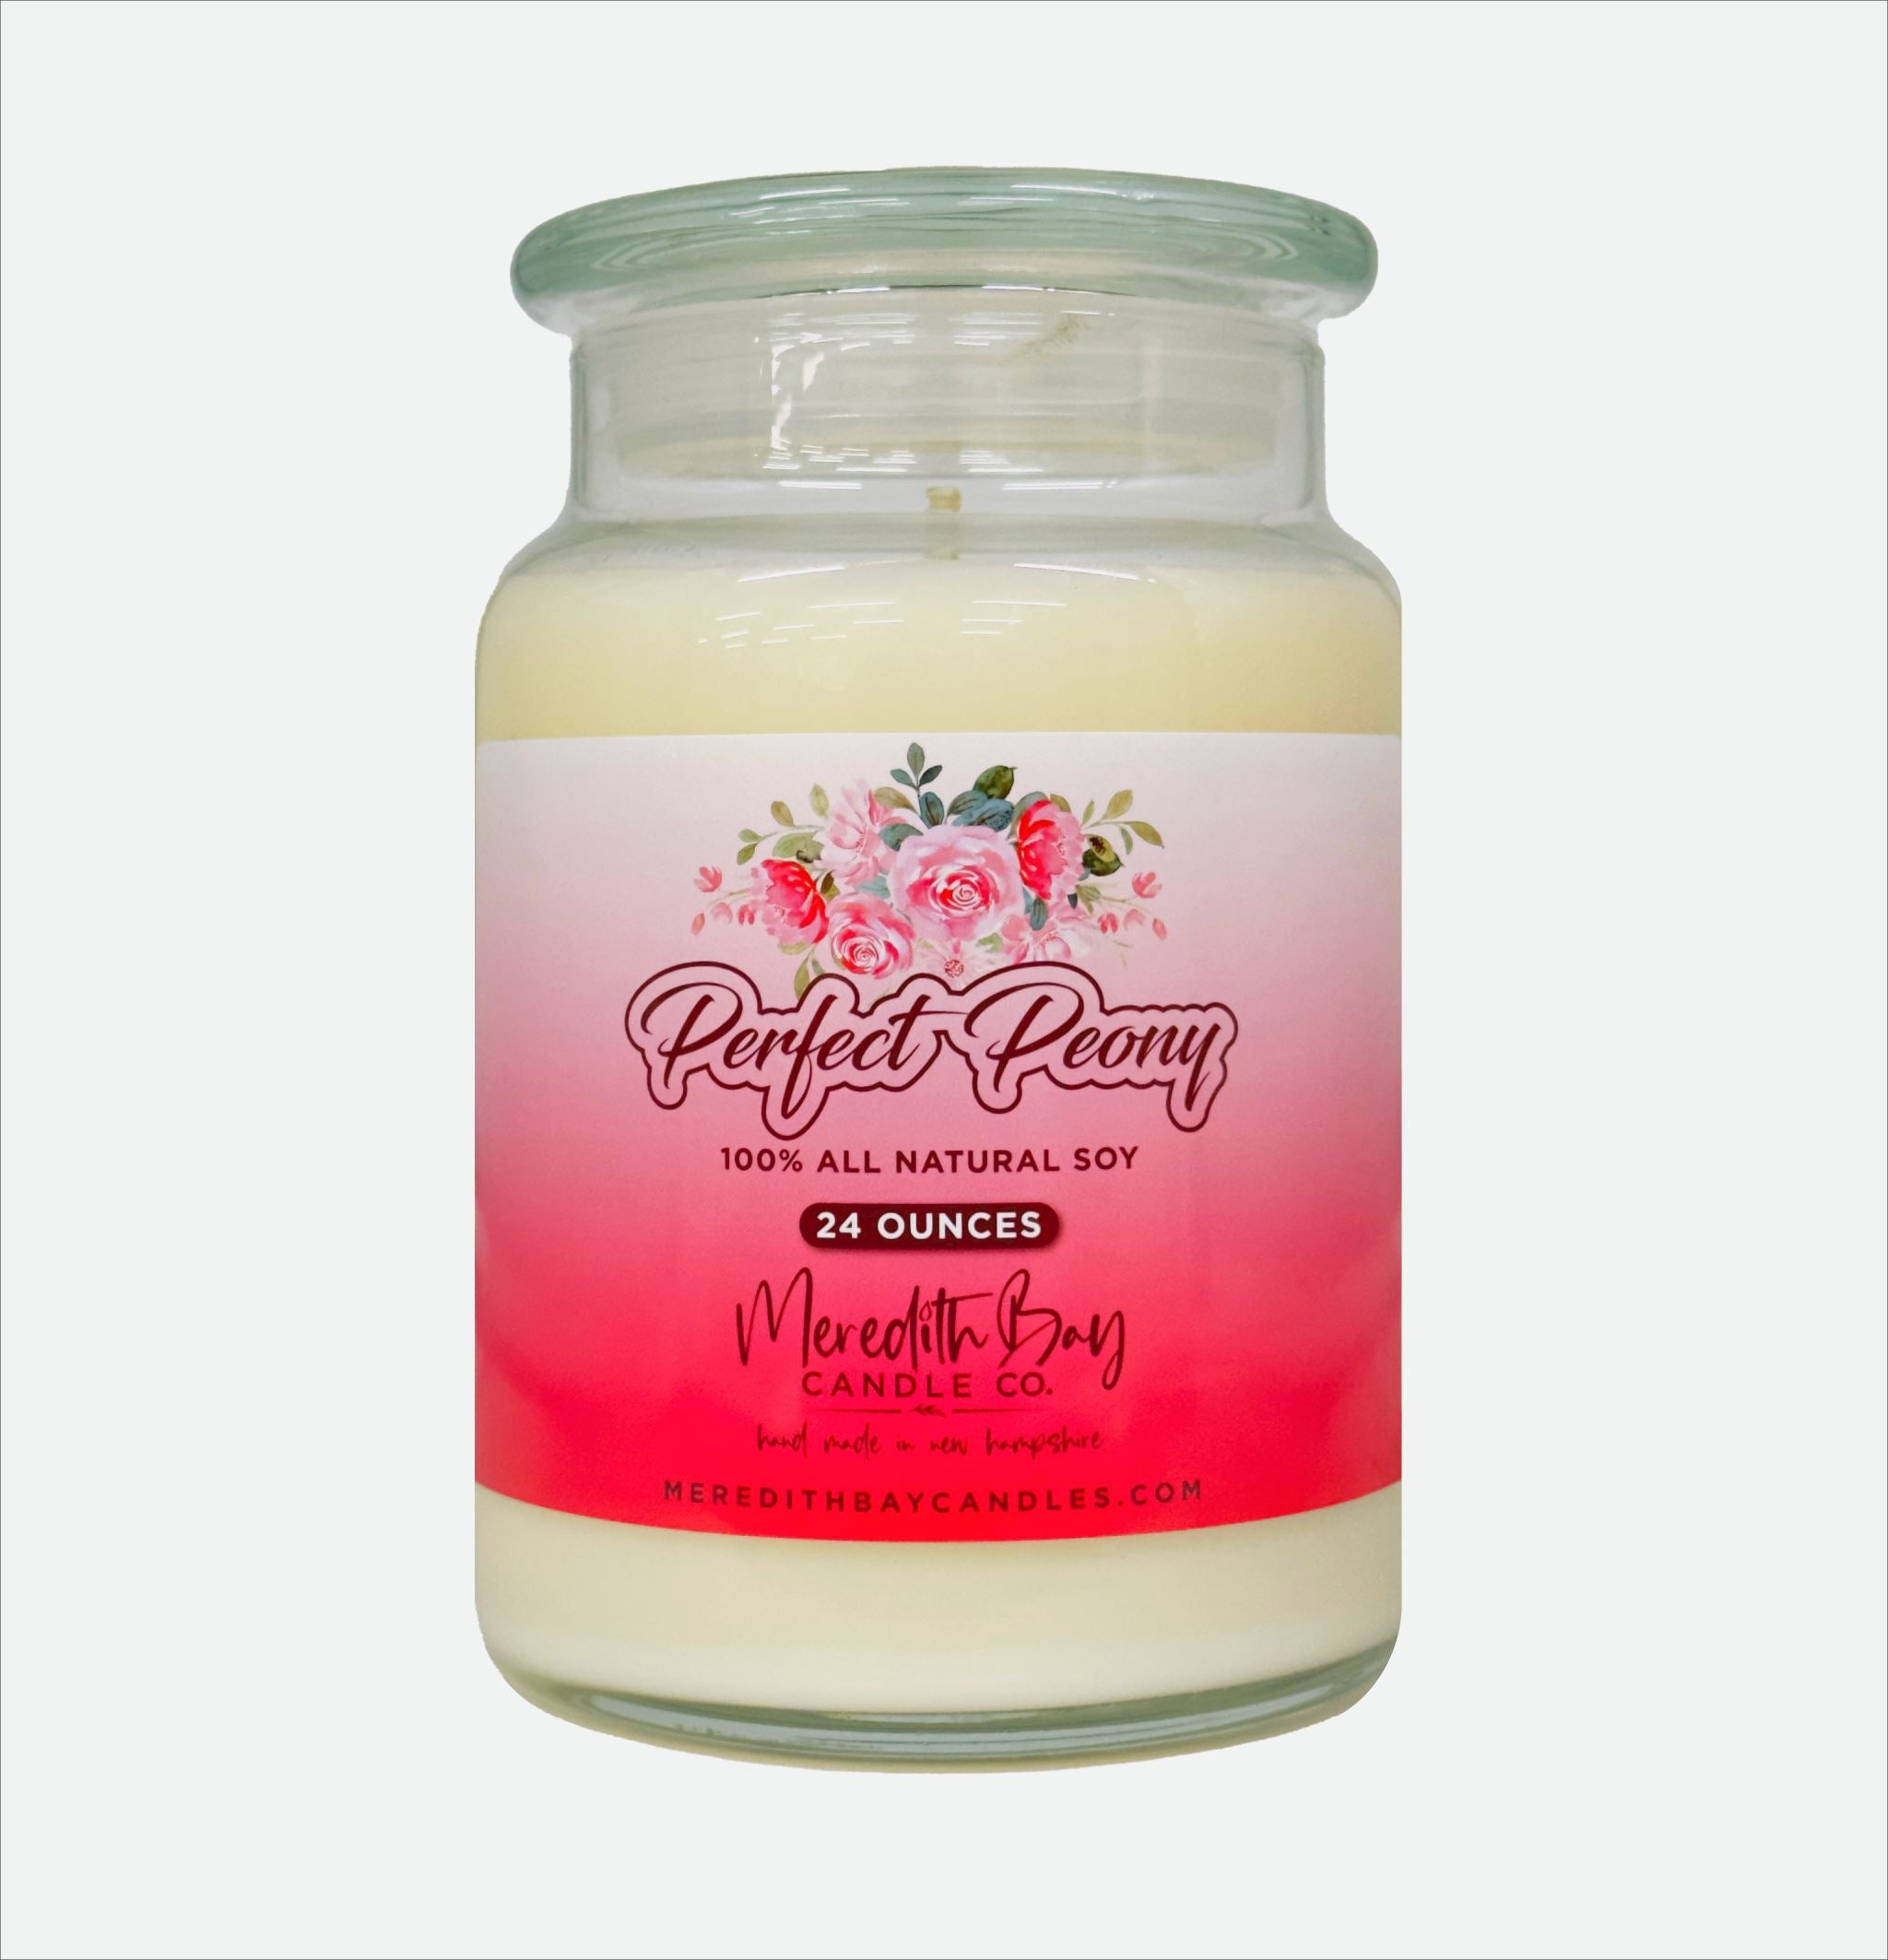 Perfect Peony Soy Candle Meredith Bay Candle Co 24 Oz 